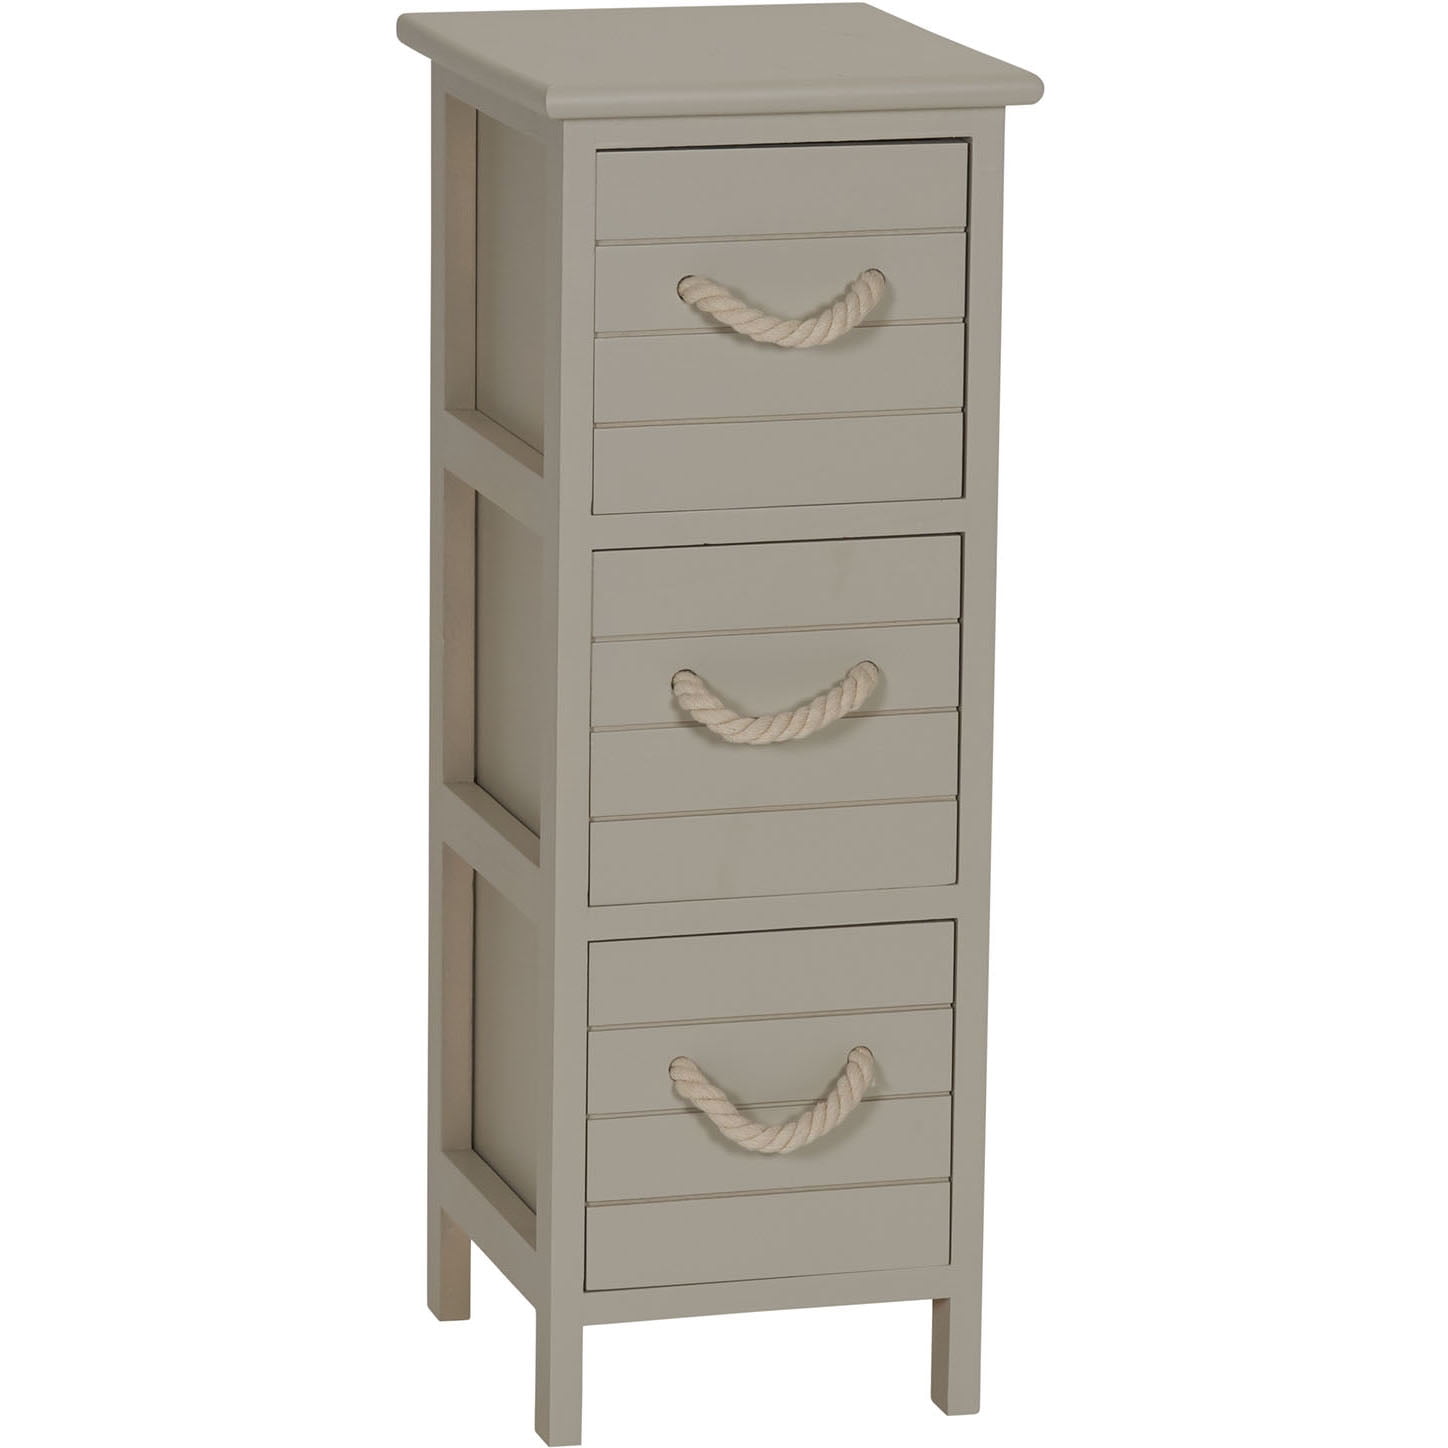 Furnituremaxi Country Style Bedside Table 3 Drawer Cabinet Storage Unit Bedroom Furniture White